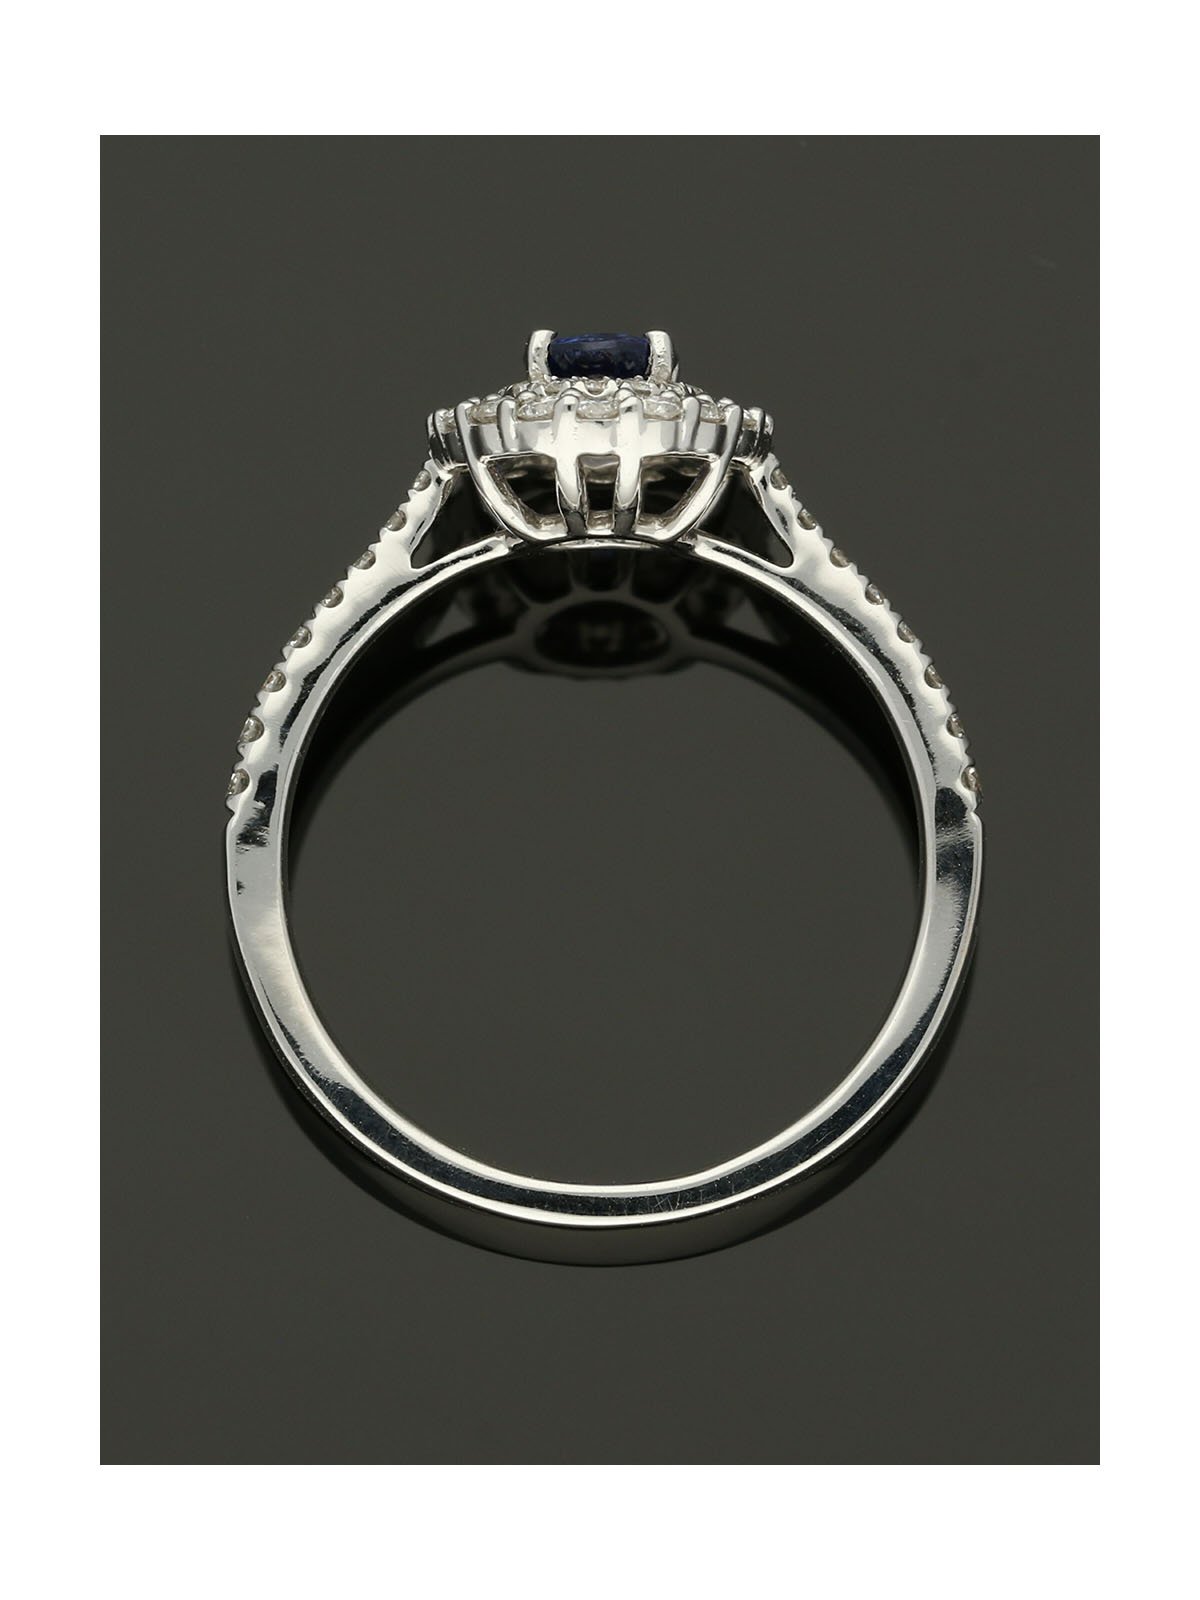 Sapphire & Diamond Cluster Ring in 18ct White Gold with Diamond Shoulders